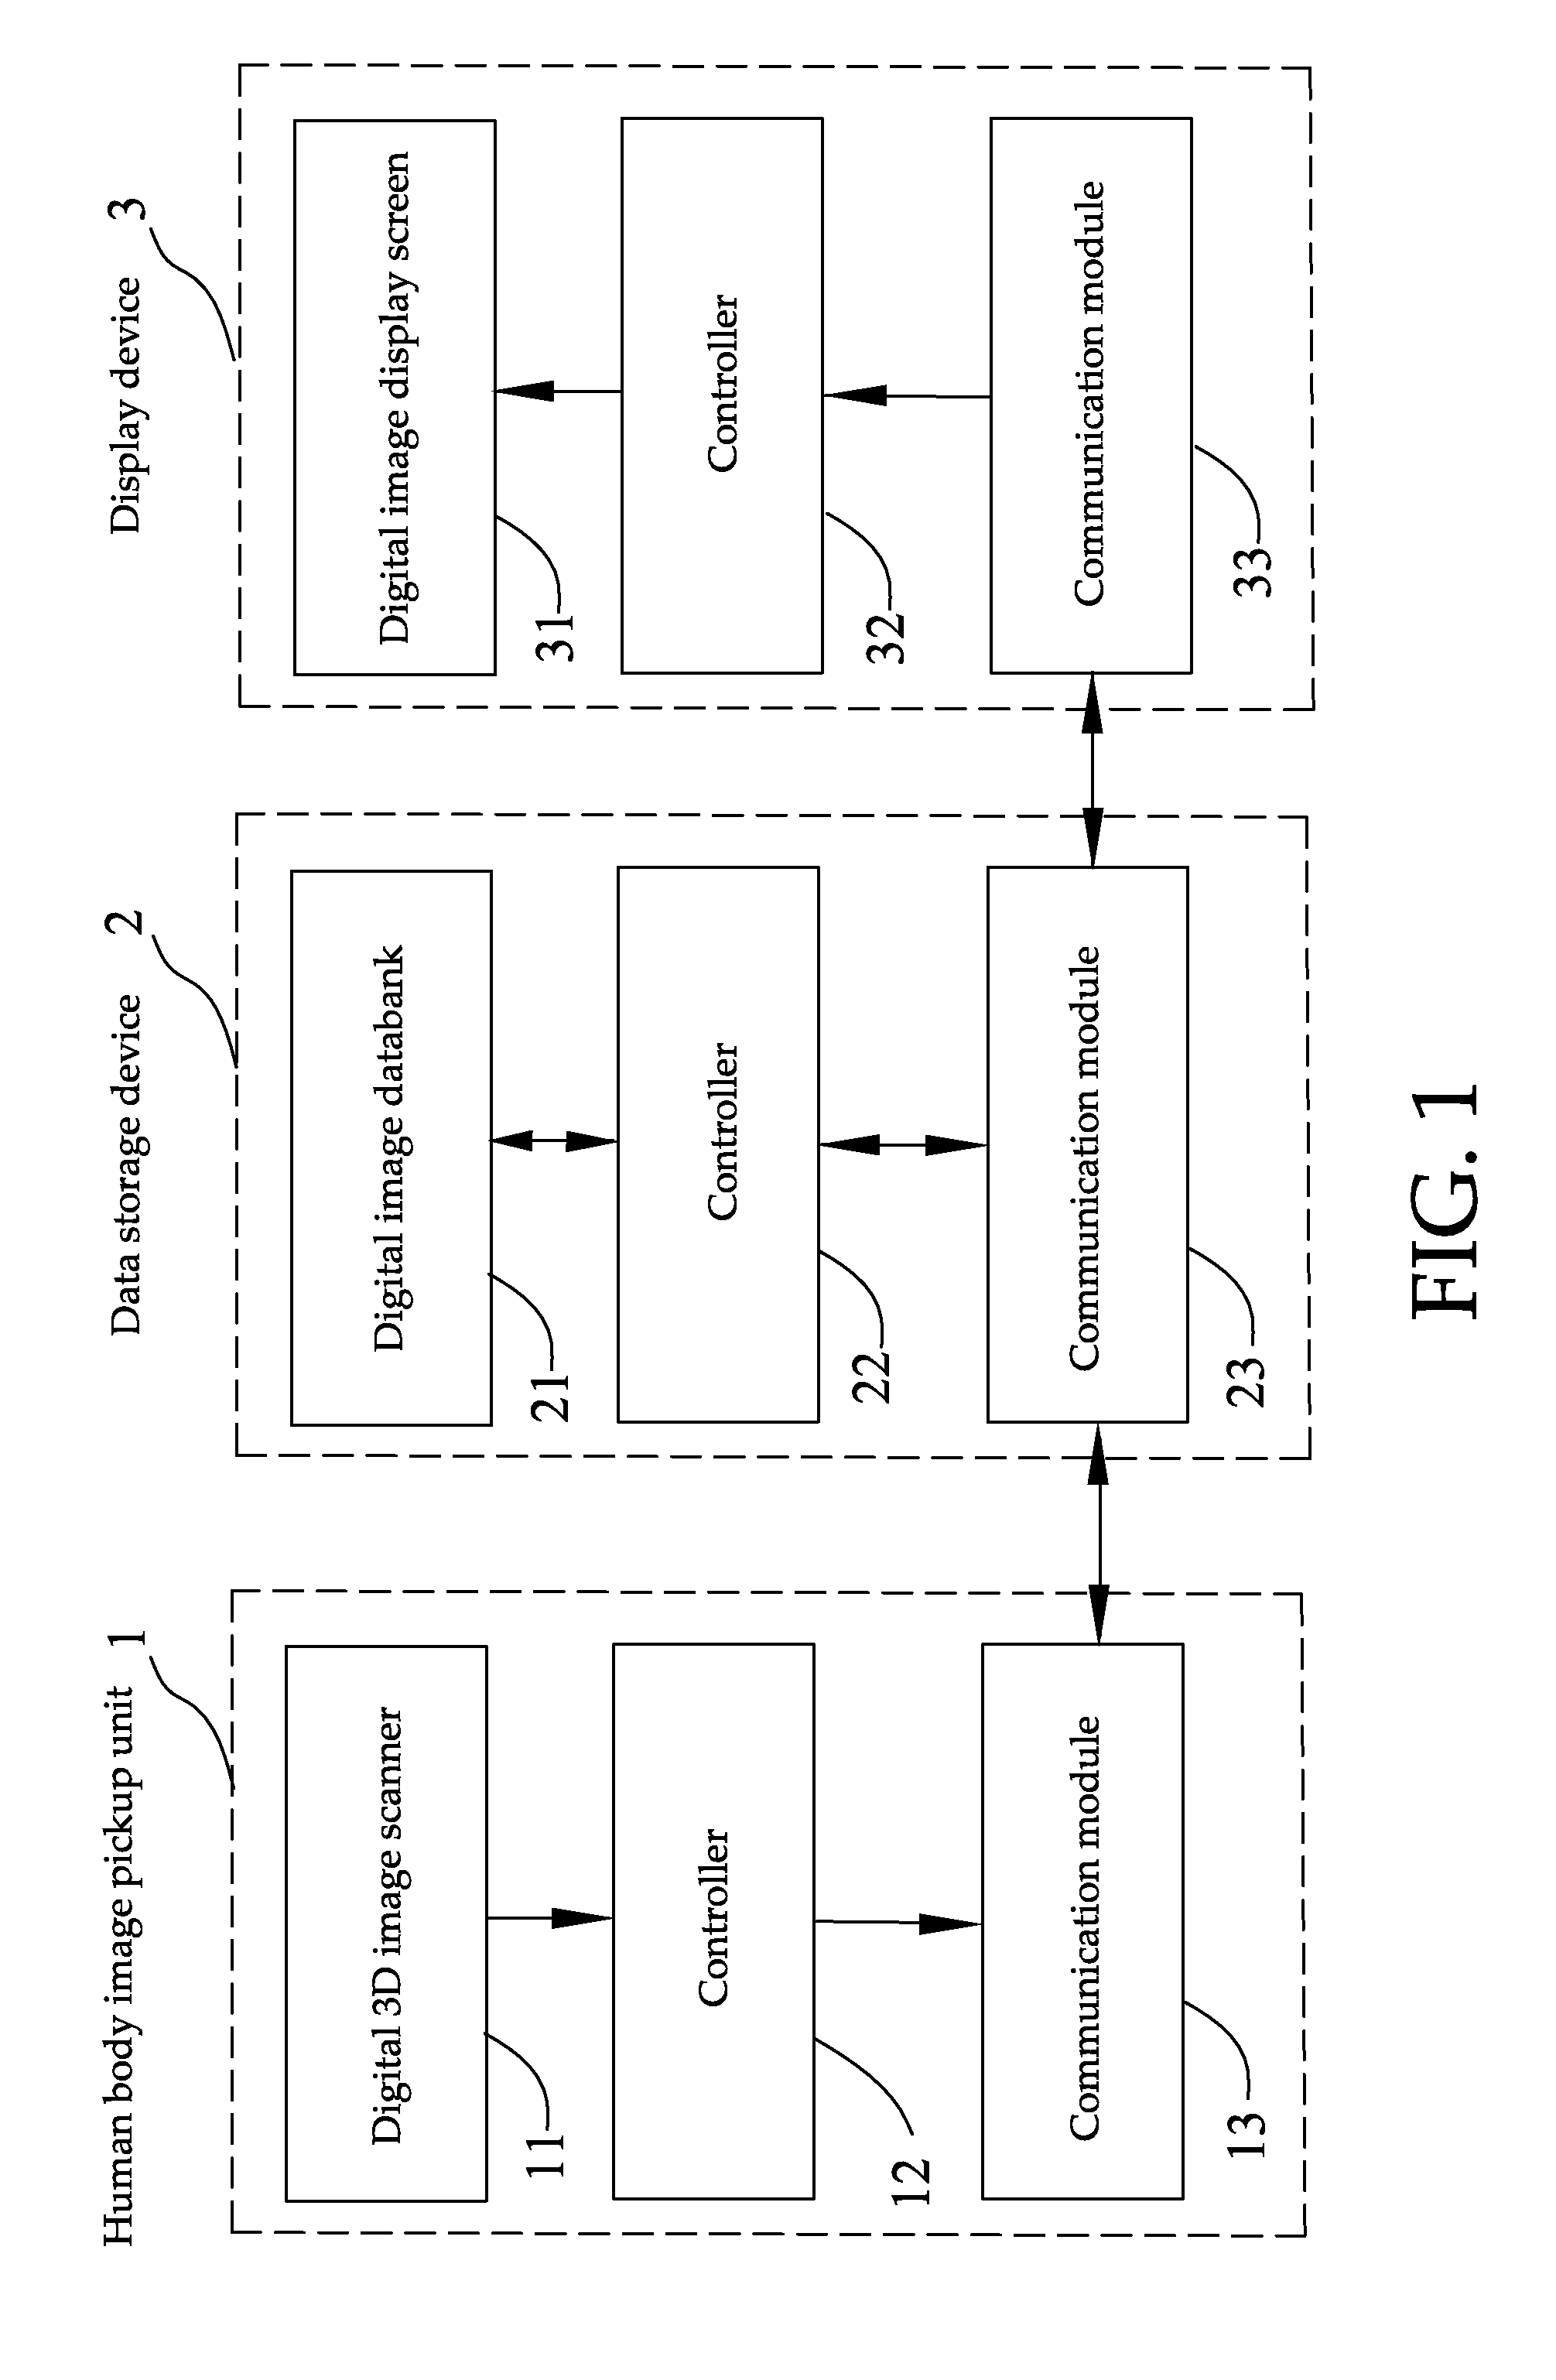 Digital image storage system and human body data comparison method for medical and aesthetic applications